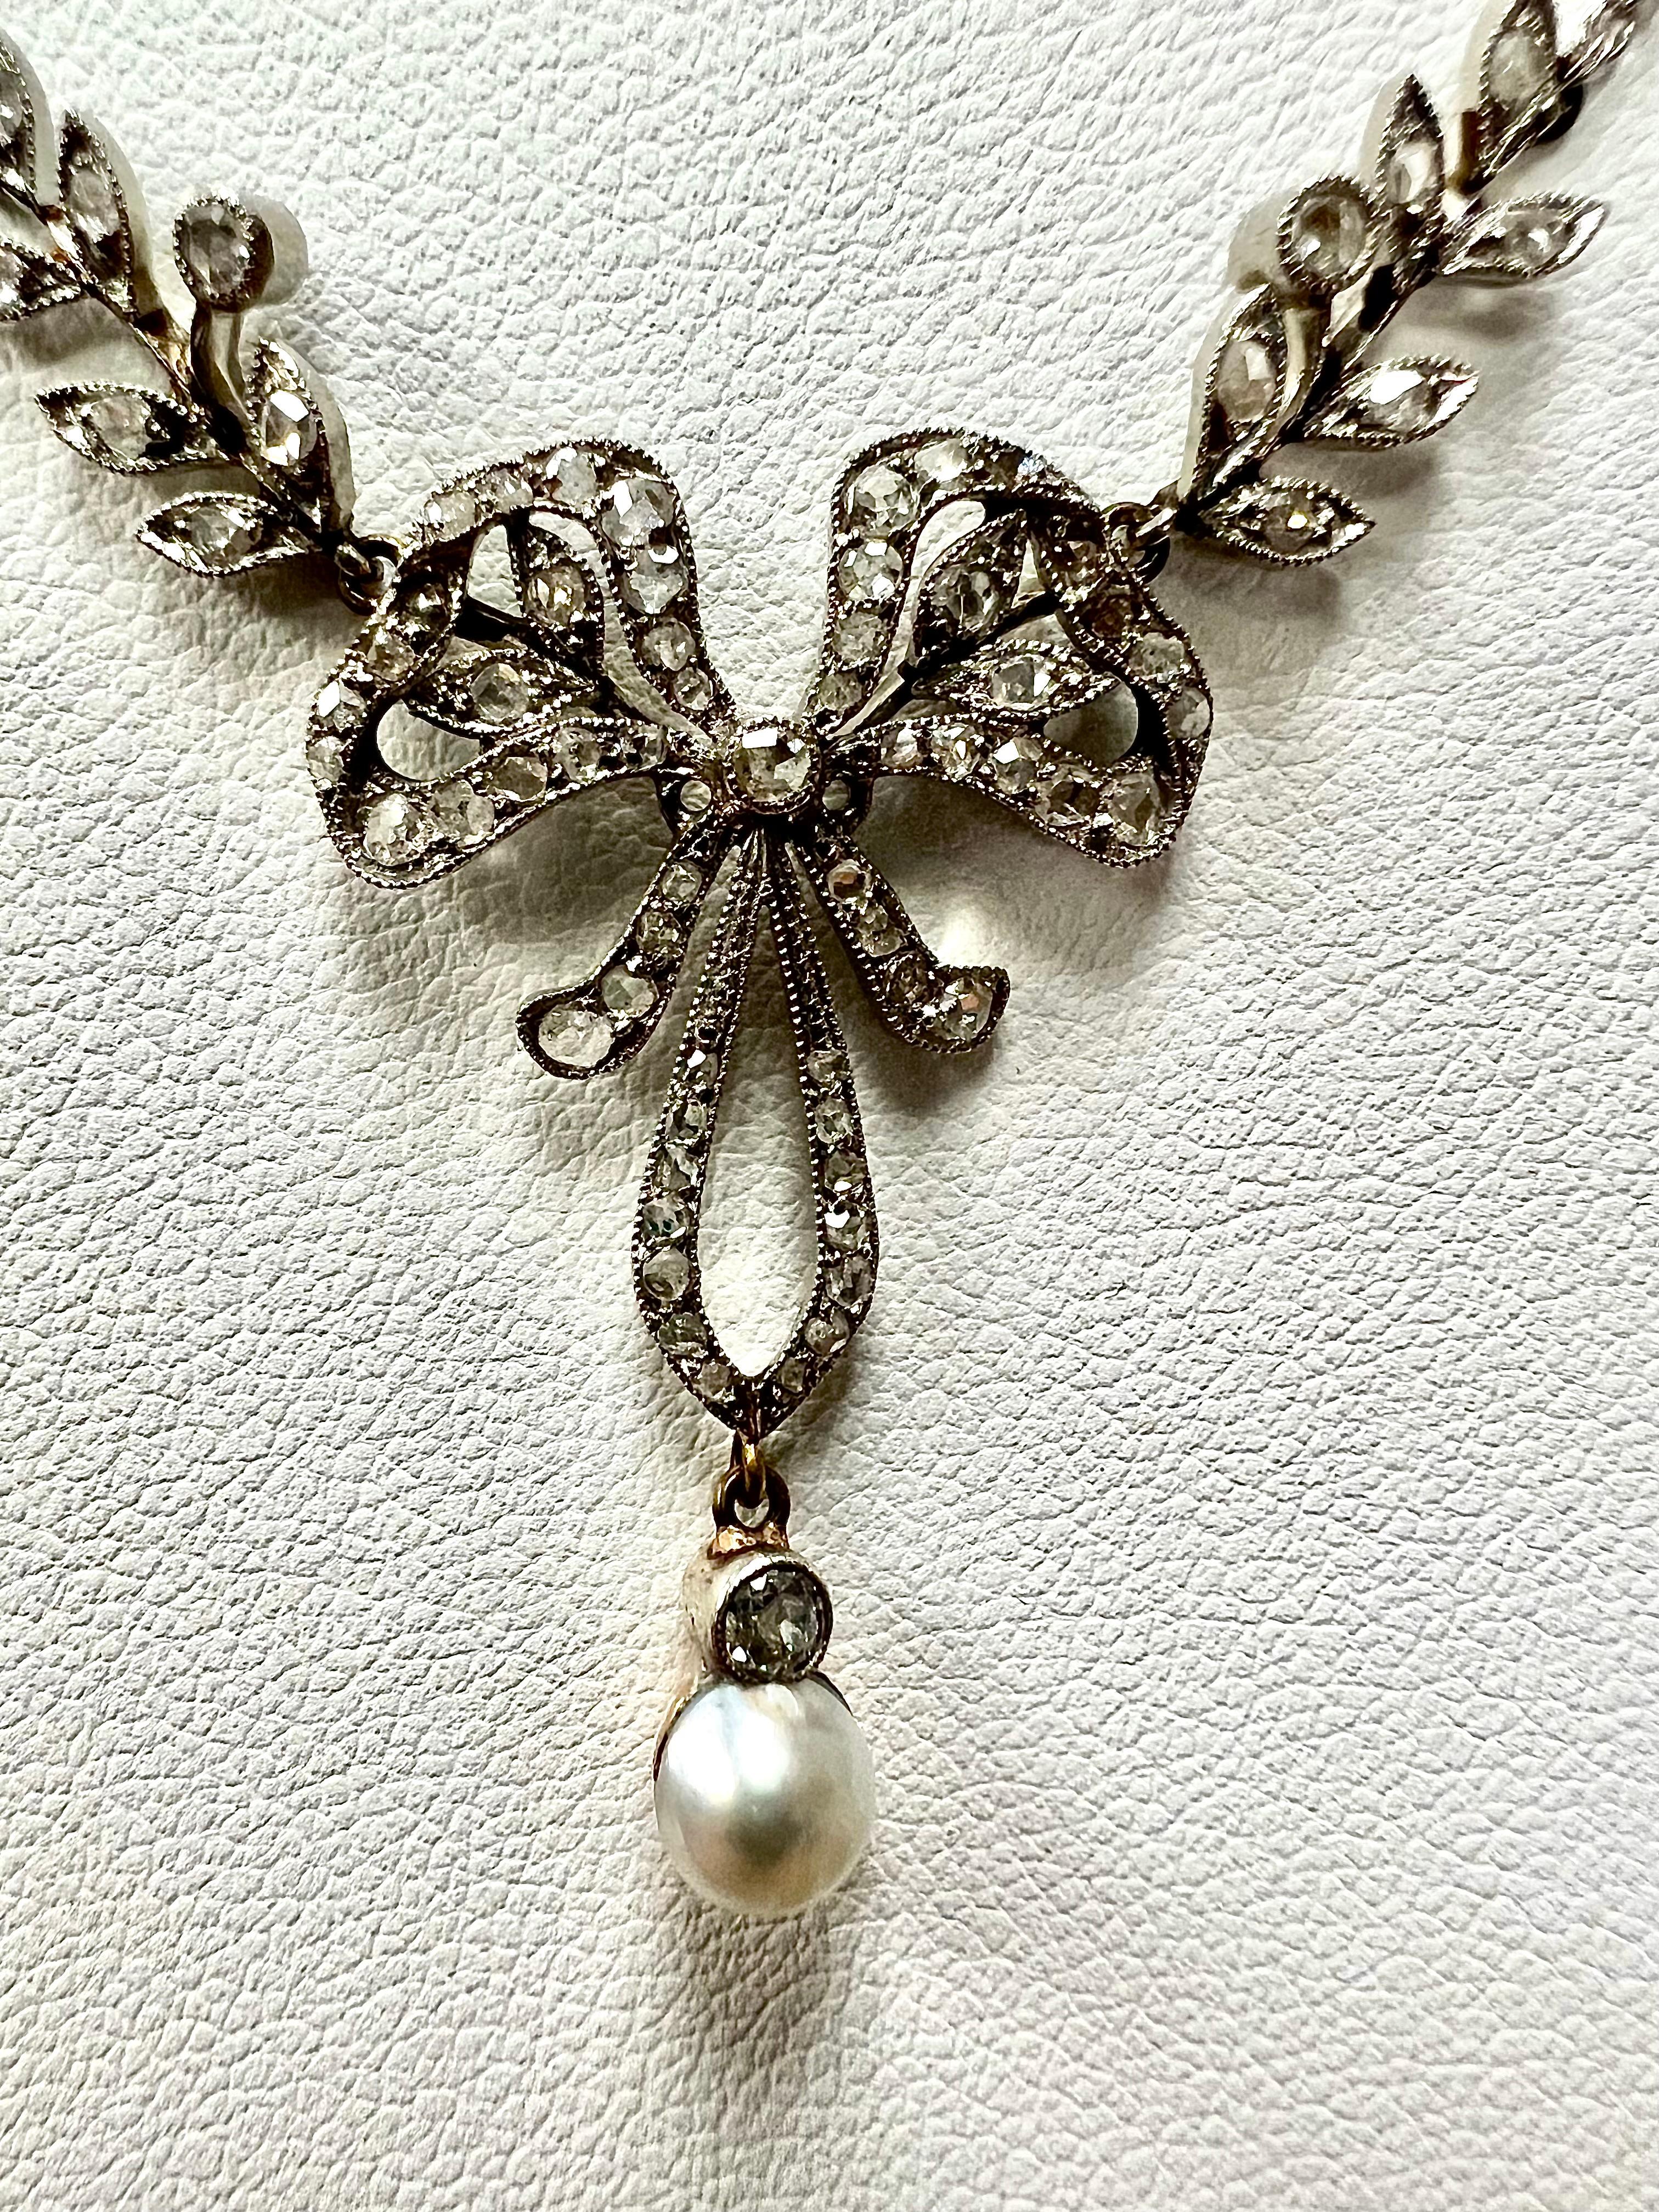 Edwardian Rose Cut Diamond Pearl Bow Platinum and white gold necklace, circa 1910.

ABOUT THIS ITEM: N-DJ111H   The Edwardian era, spanning from 1901 to 1910, was a time of elegance and refinement in the world of fashion and jewelry. One exquisite